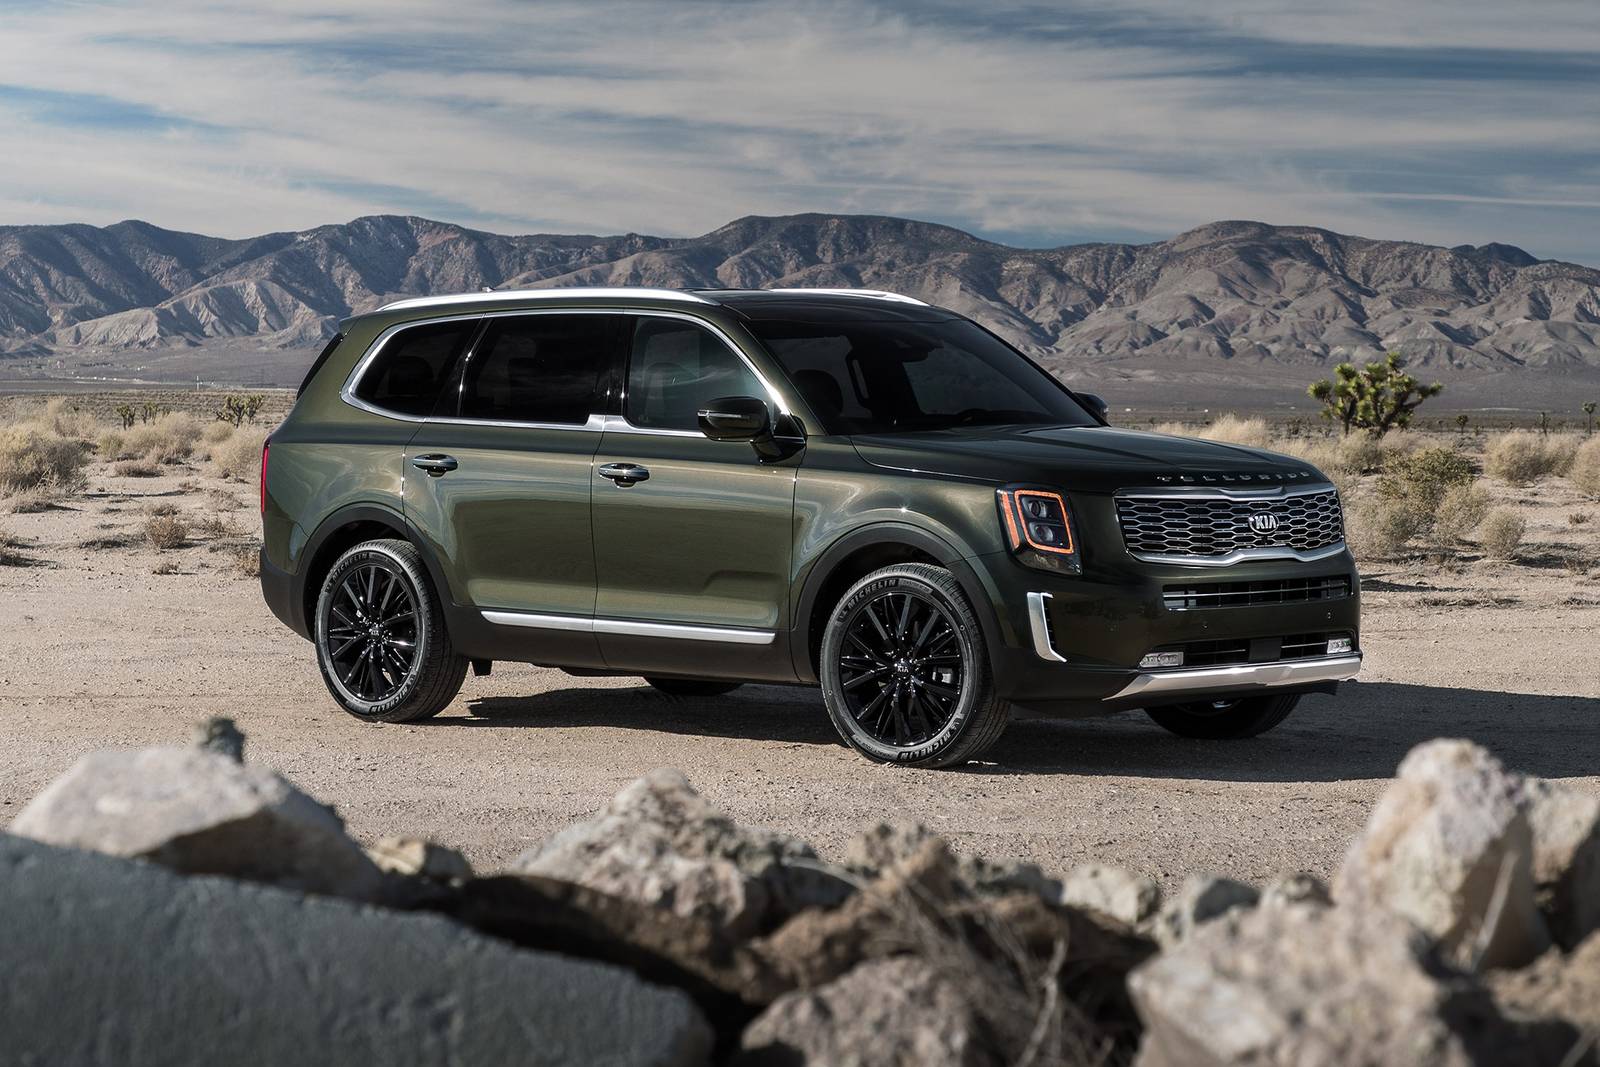 2020 Kia Telluride Prices, Reviews, and Pictures | Edmunds